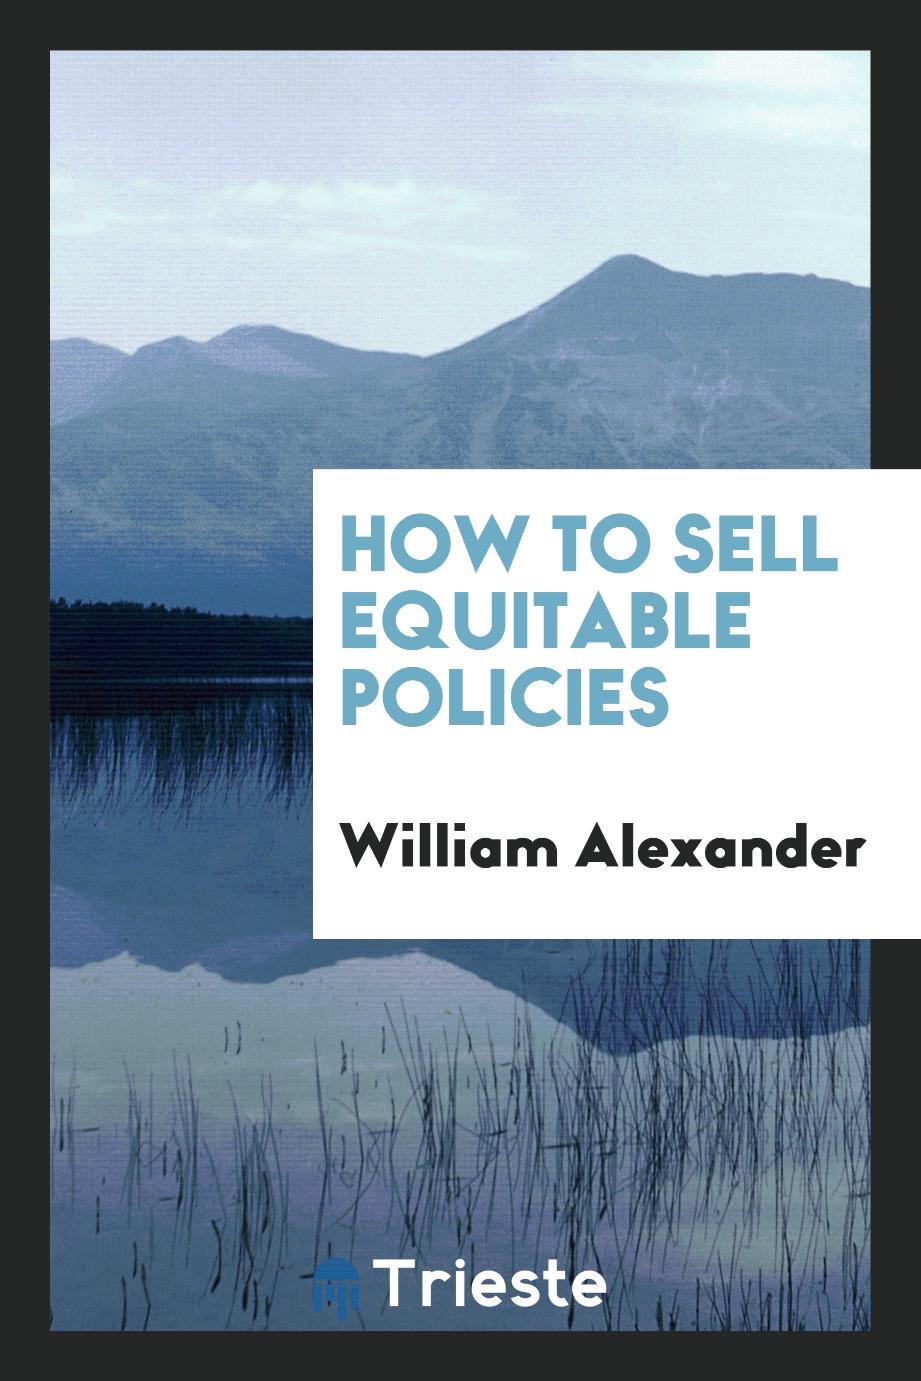 How to Sell Equitable Policies